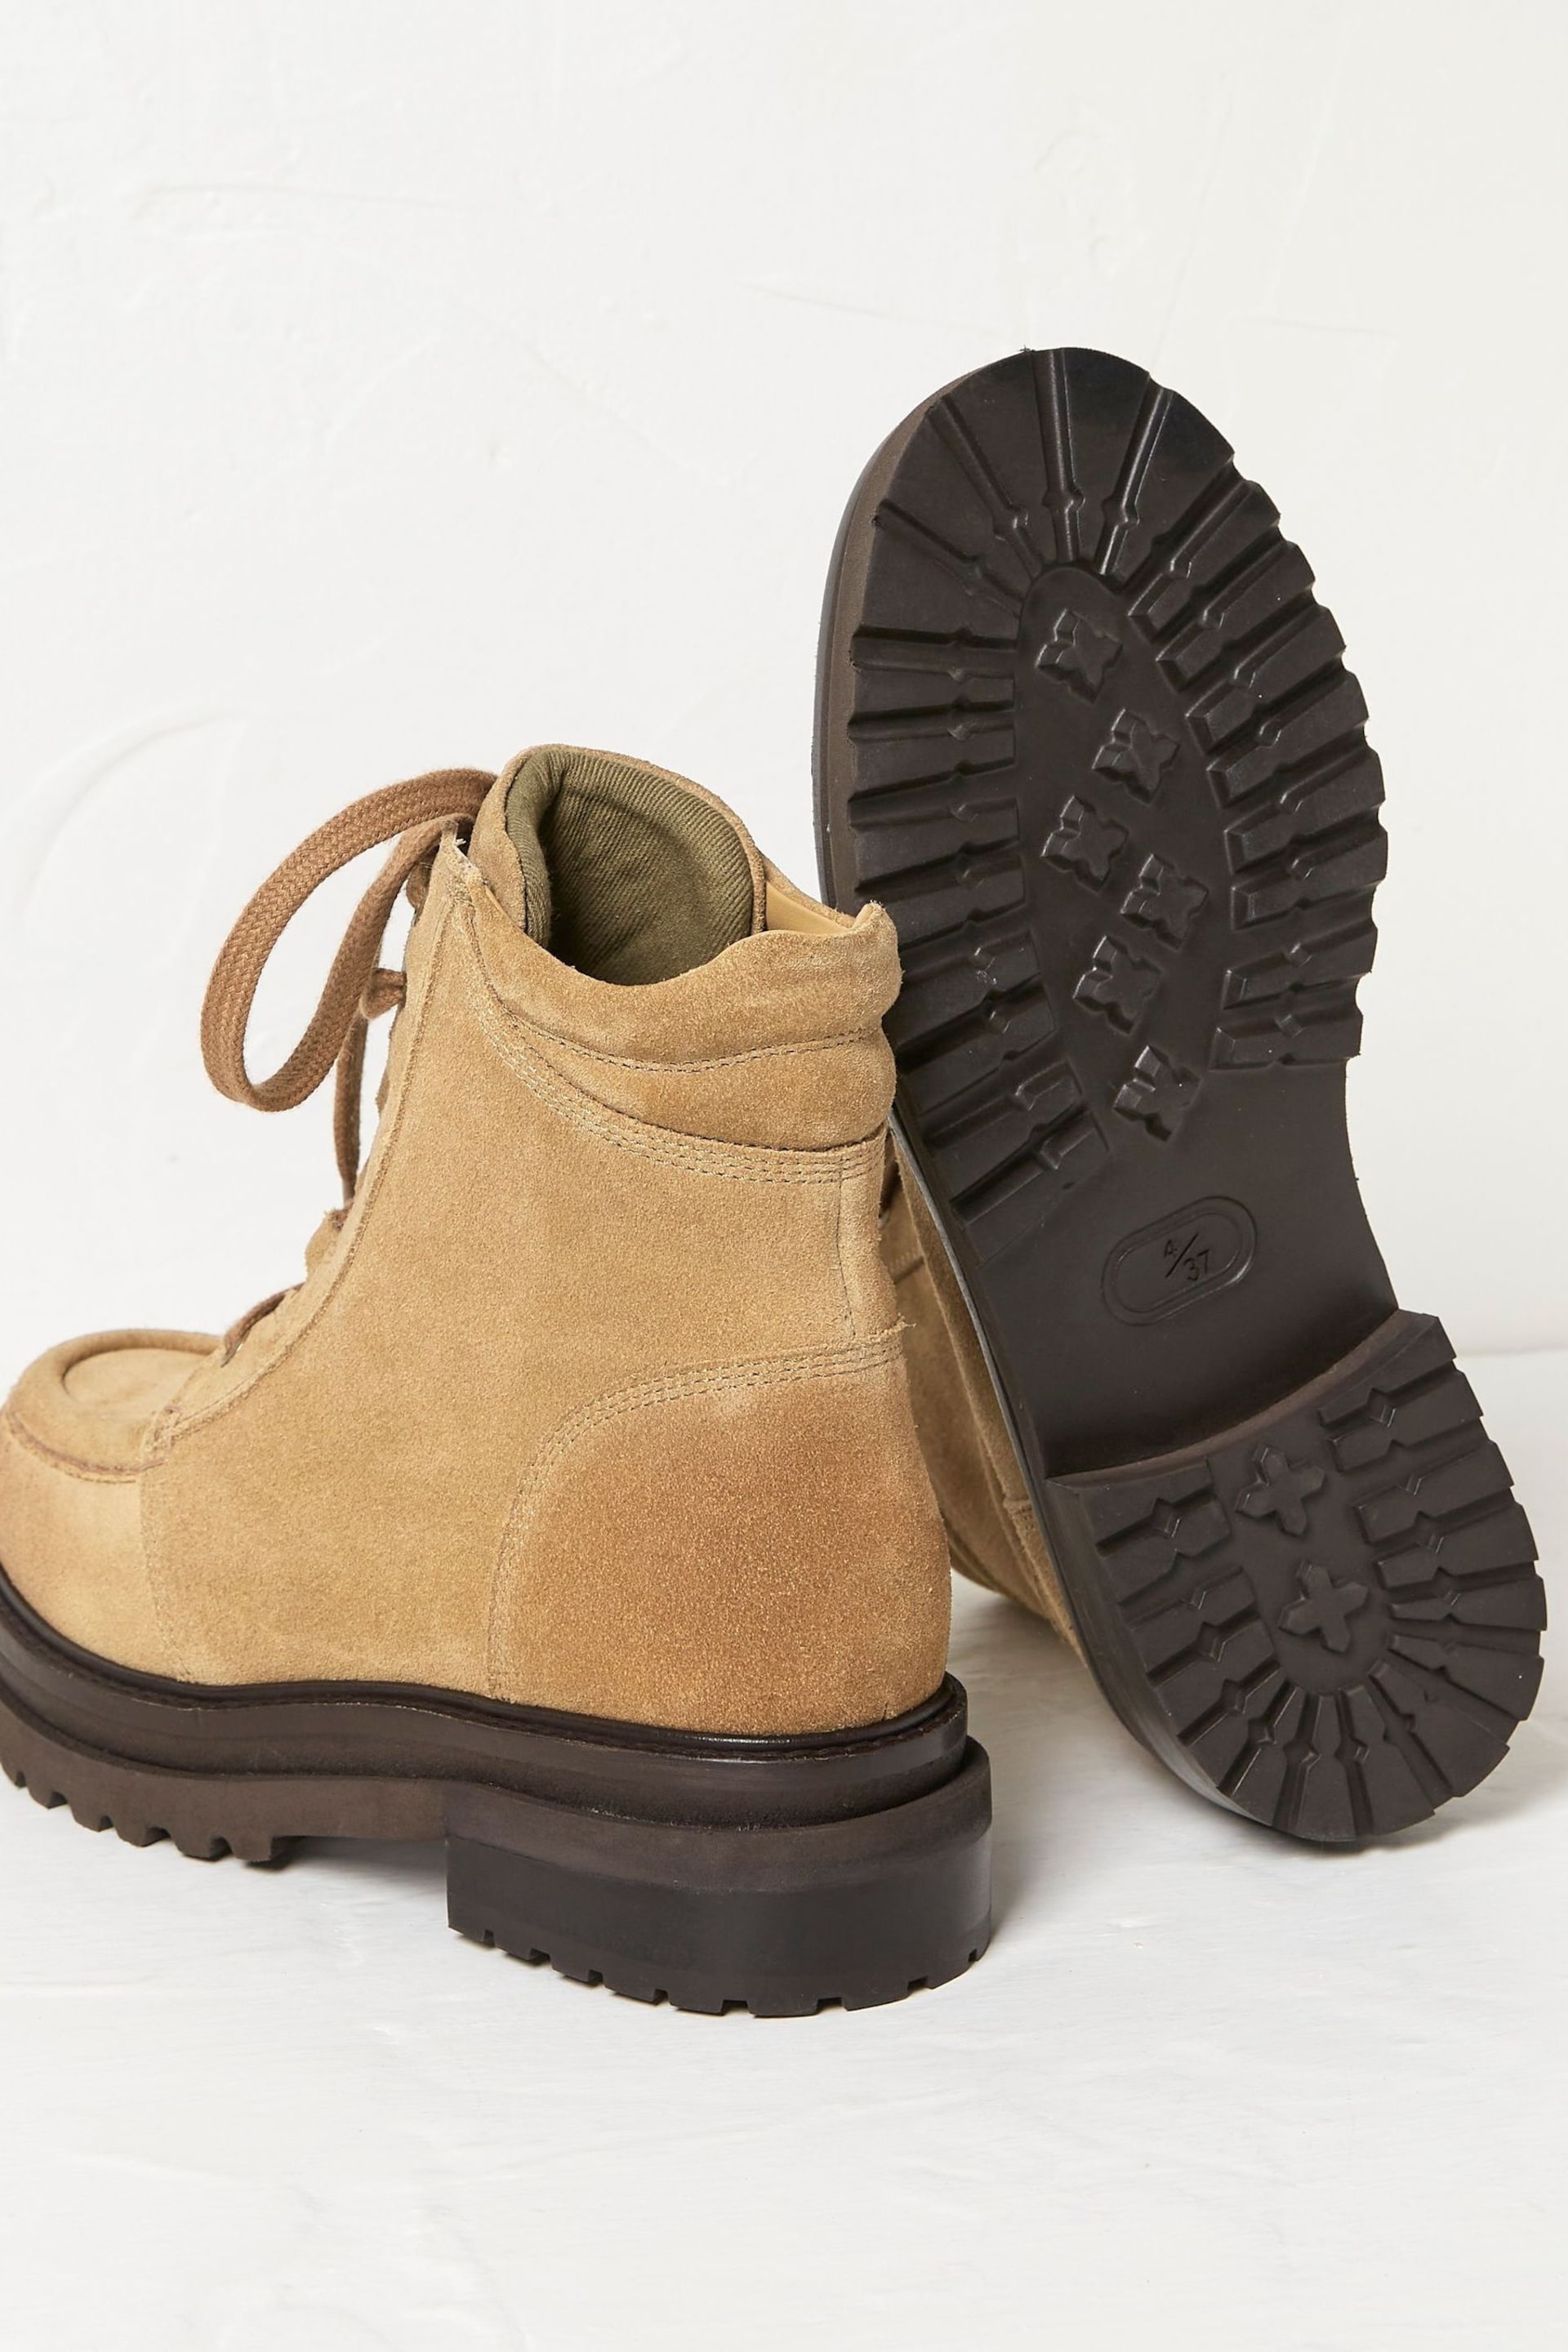 FatFace Brown Clover Suede Apron Ankle Boots - Image 2 of 4